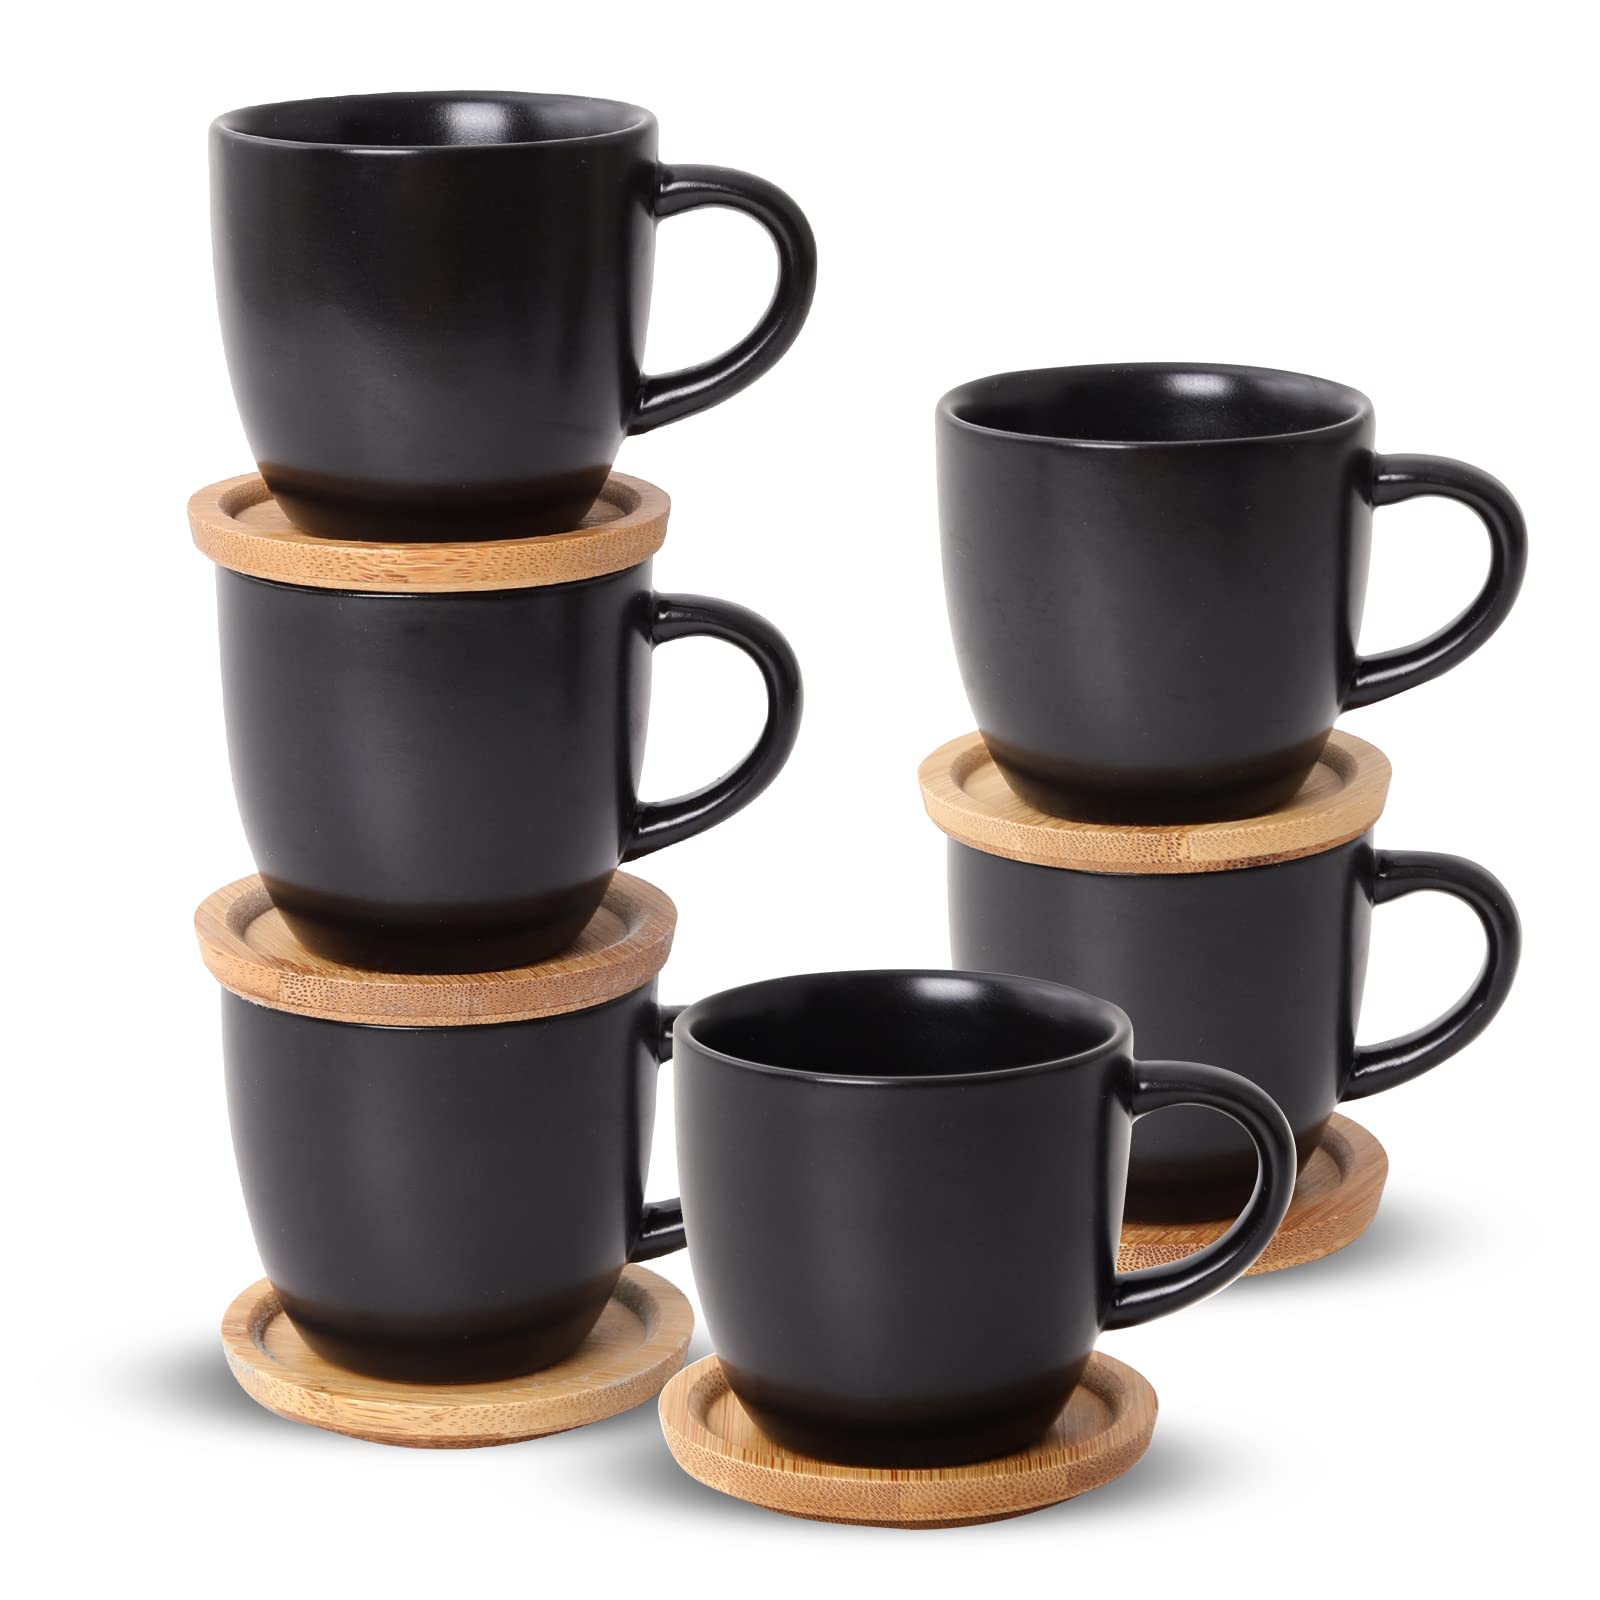 Hasense Espresso Cups and Saucers Set of 6, Demitasse Cups with Handle for Coffee Drinks, Latte, Cappuccino, Cafe Mocha and Tea, 4 Ounce Porcelain Coffee Cups for Coffee Bar Home and Party, Black